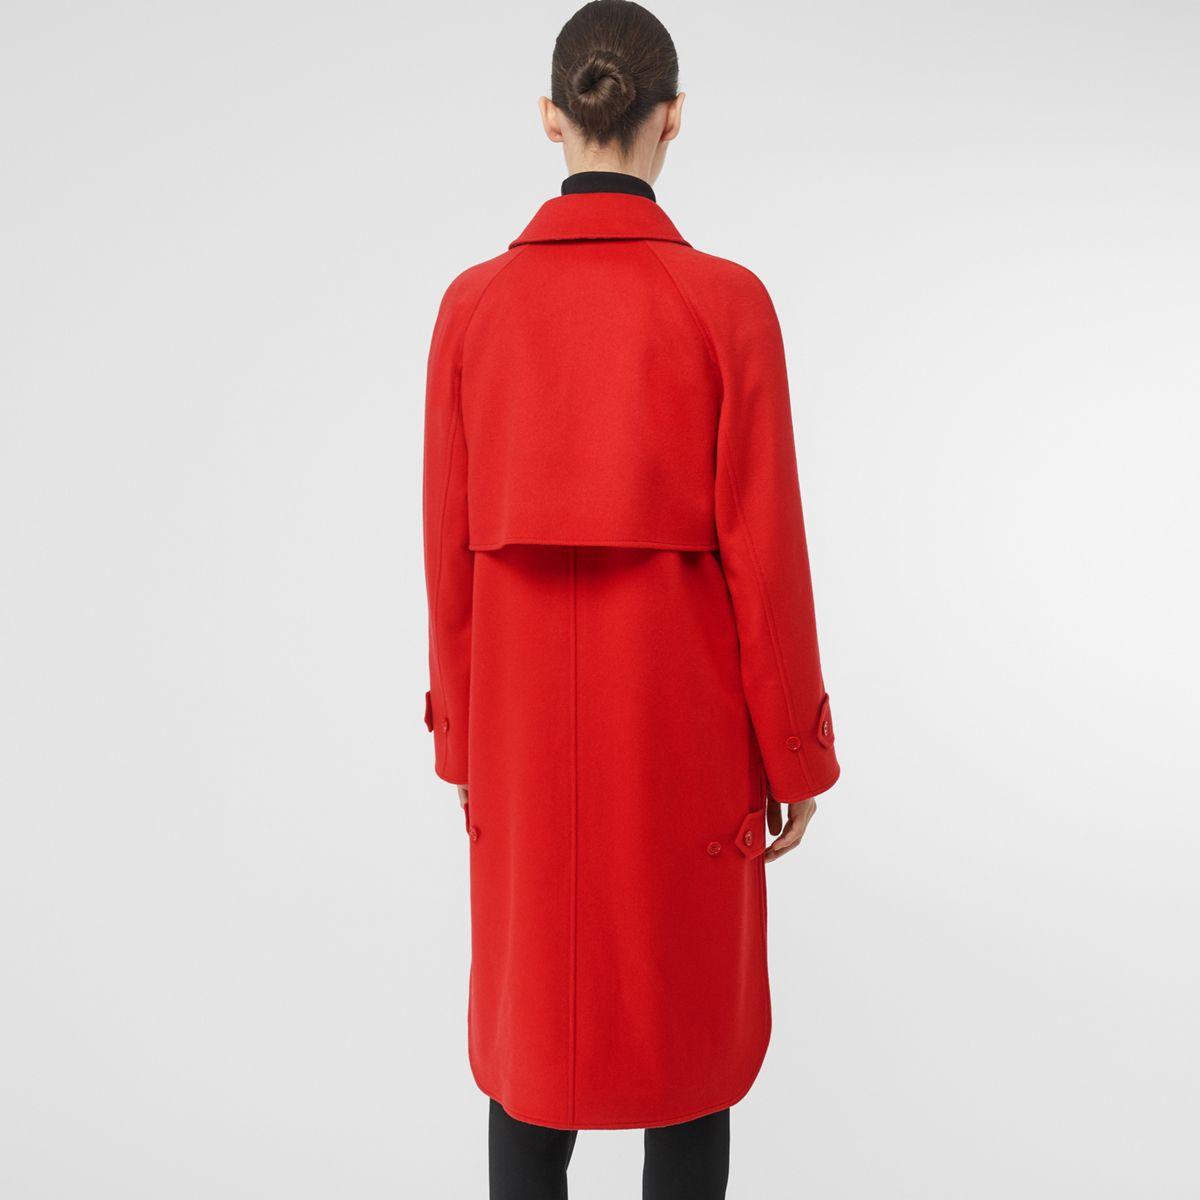 Burberry Synthetic Cashmere Car Coat in Bright Red (Red) - Lyst